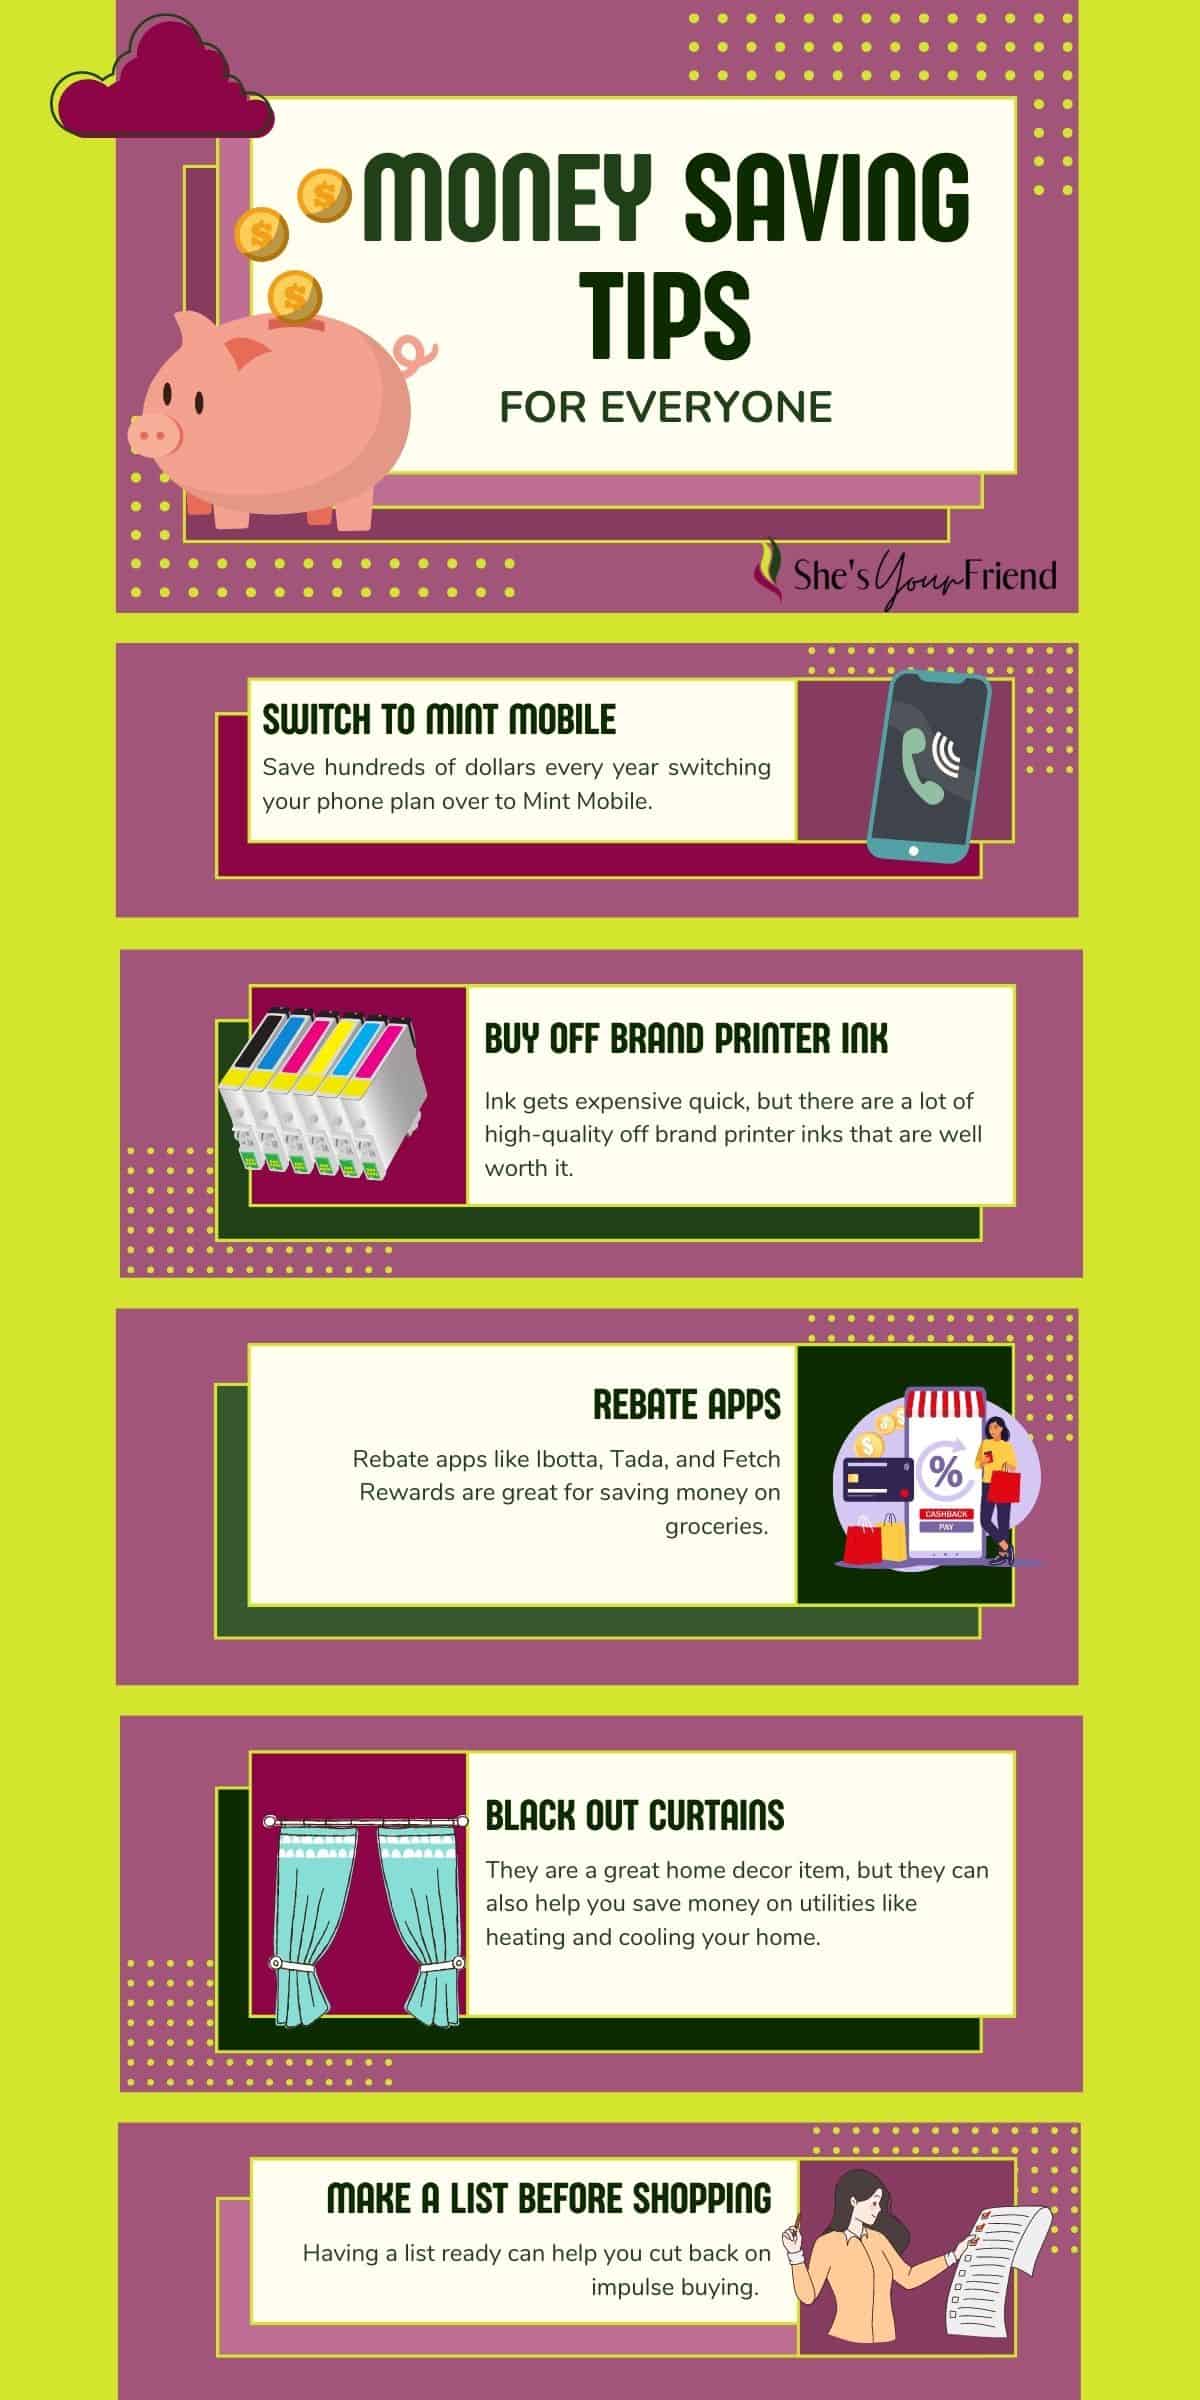 infographic showing money saving tips including switch to mint mobile buy off brand printer ink rebate apps black out curtains and make a list before shopping